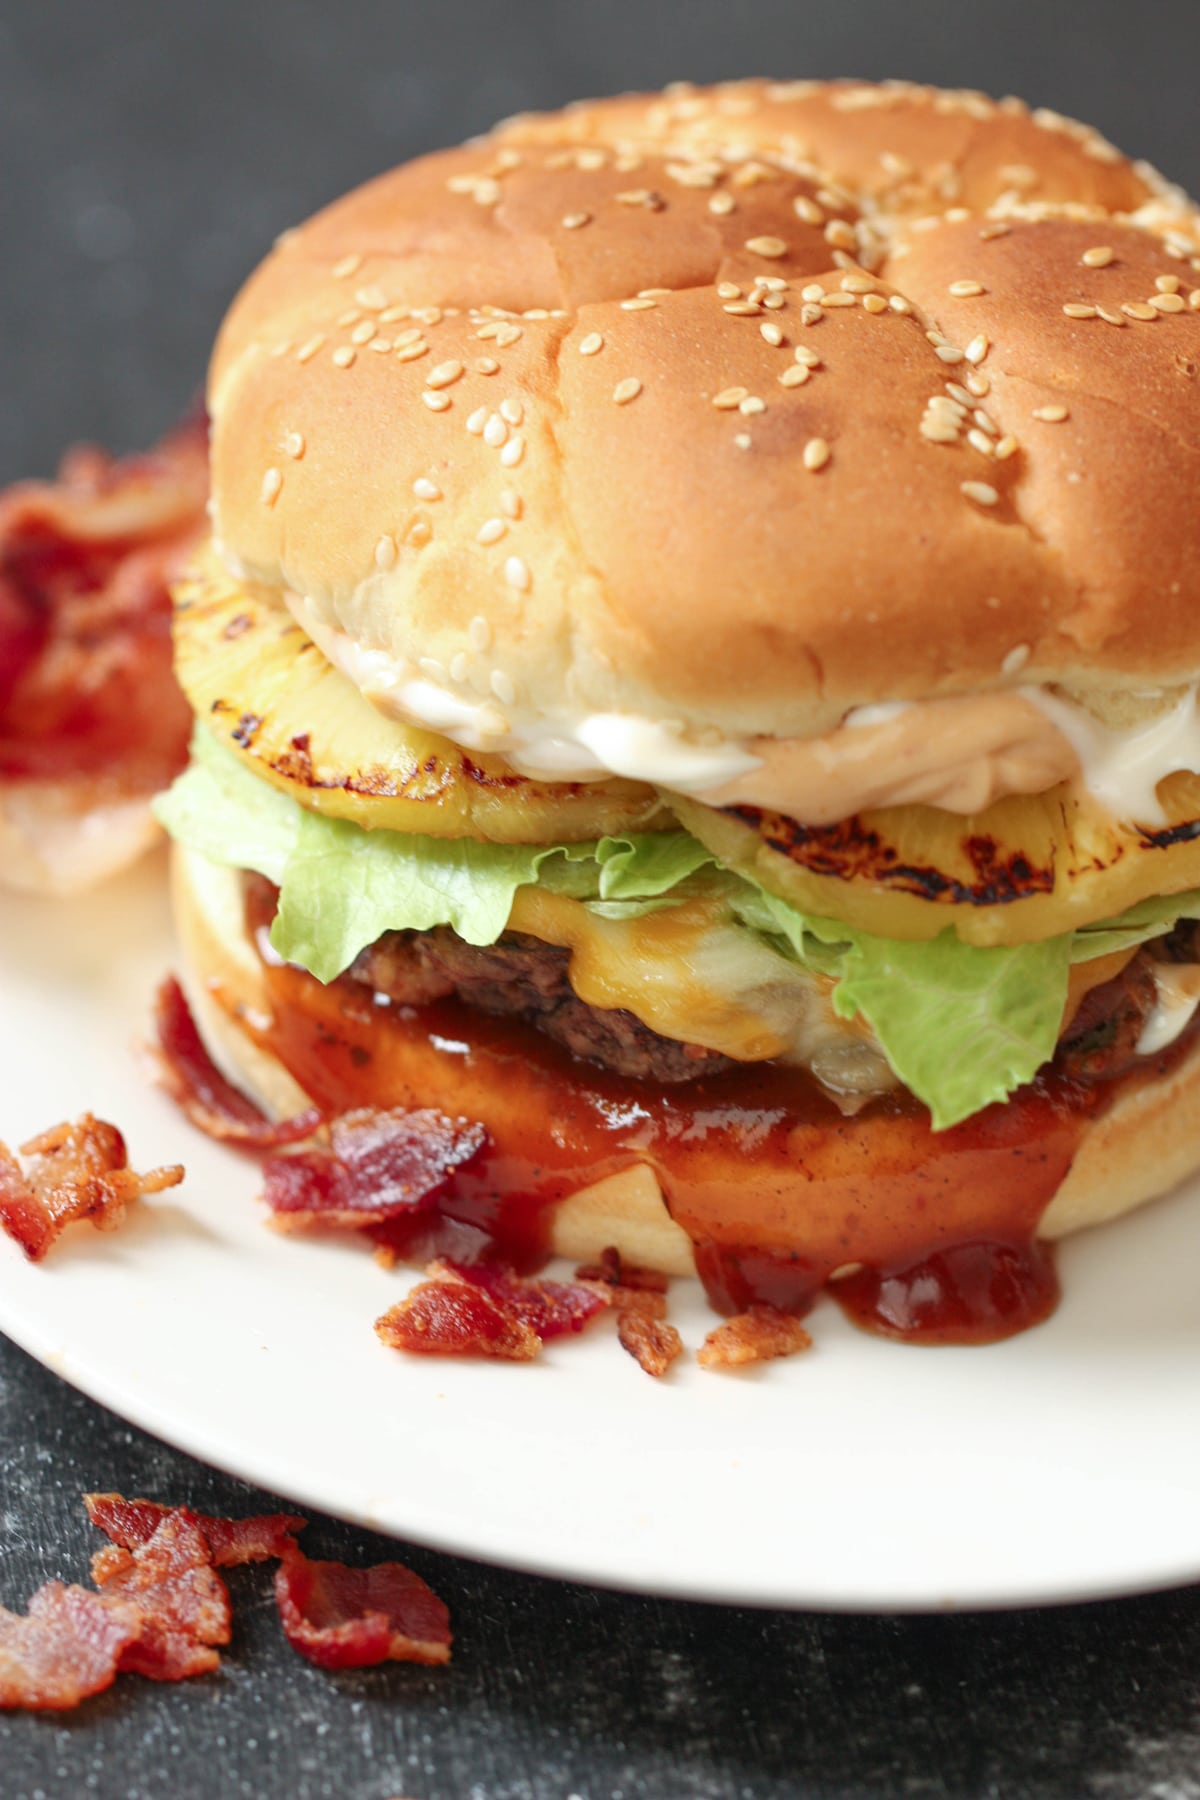 Bacon infused burgers